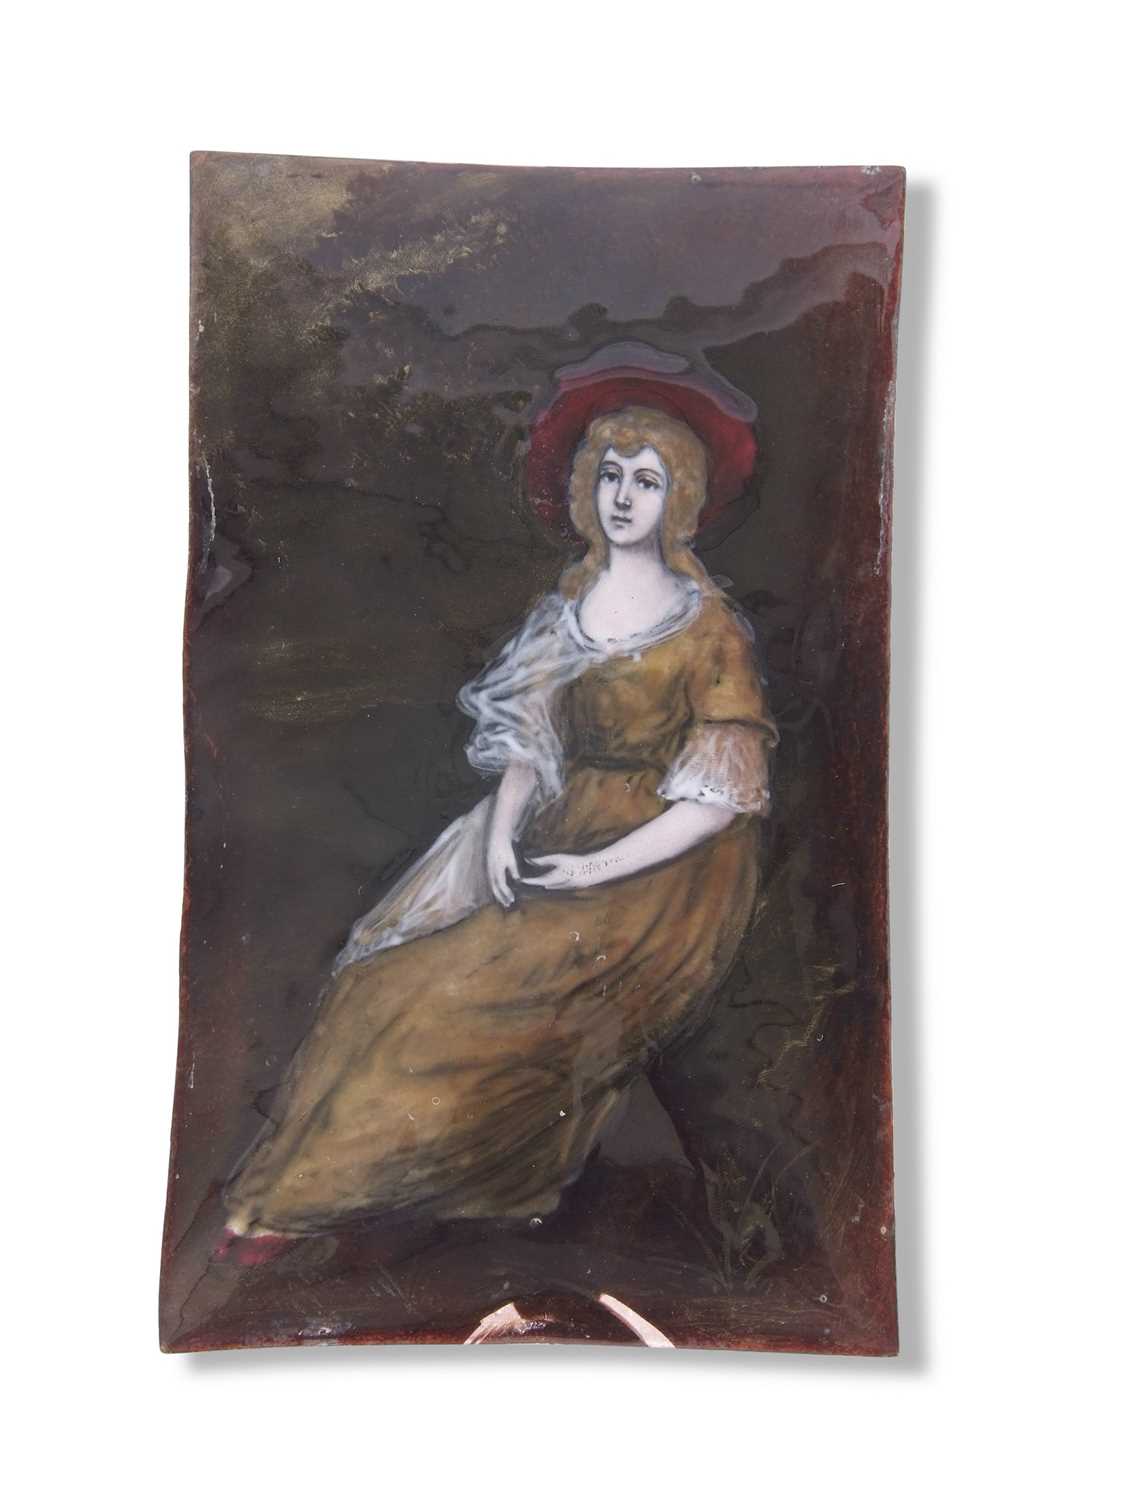 Unsigned convex enamelled and metal rectangular plaque depicting a young lady seated in landscape